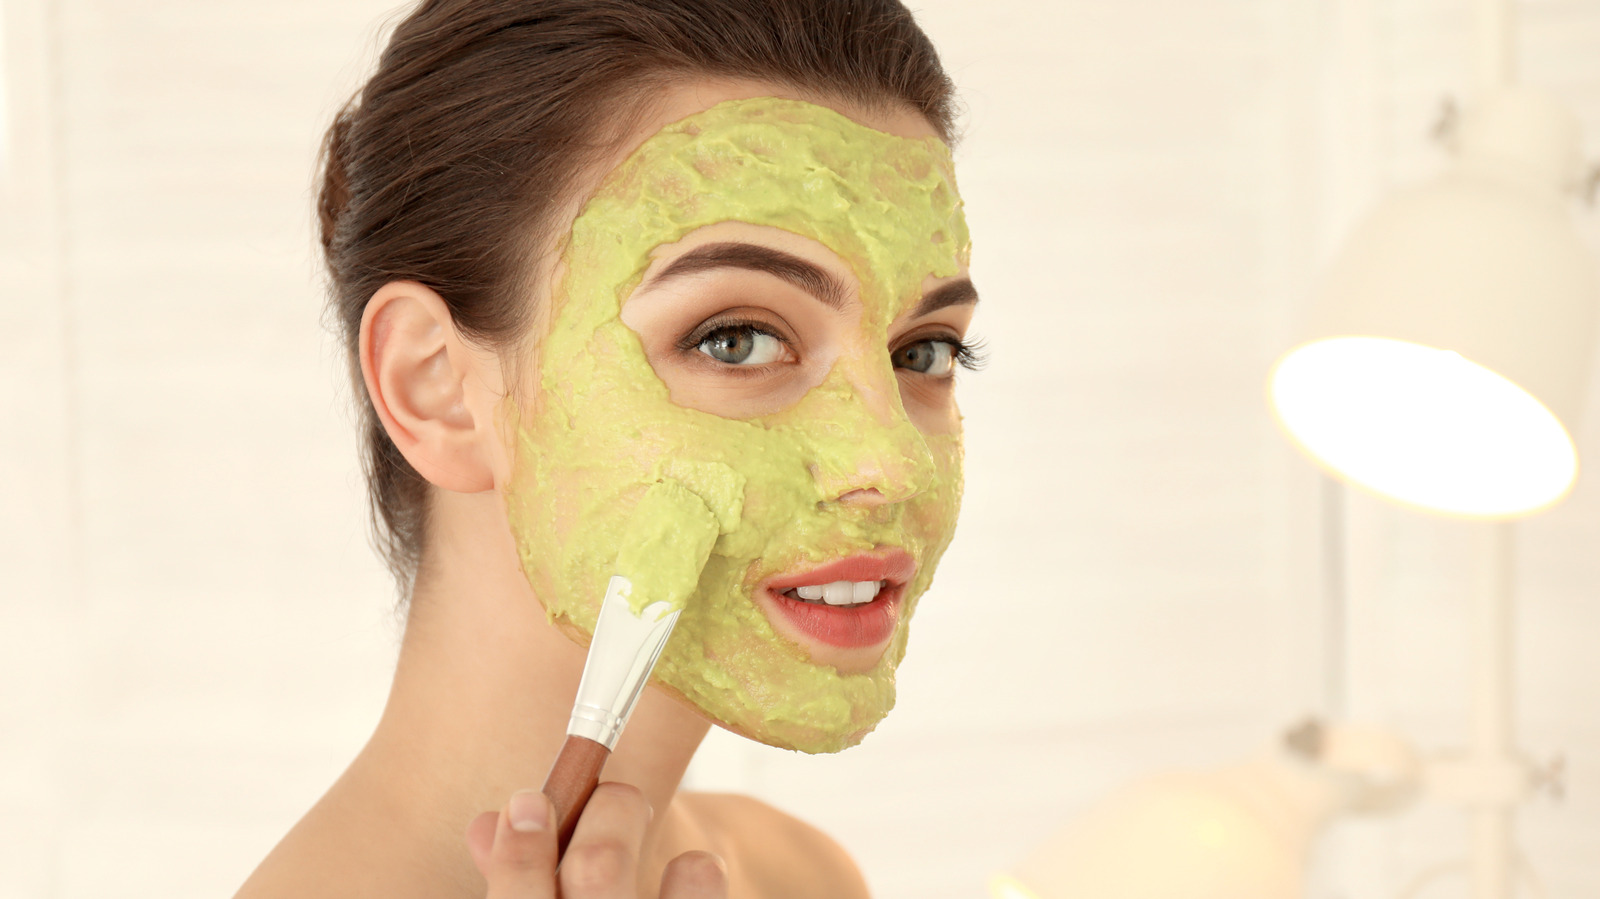 15 DIY Face Mask Ideas For Your Next Self-Care hq nude photo